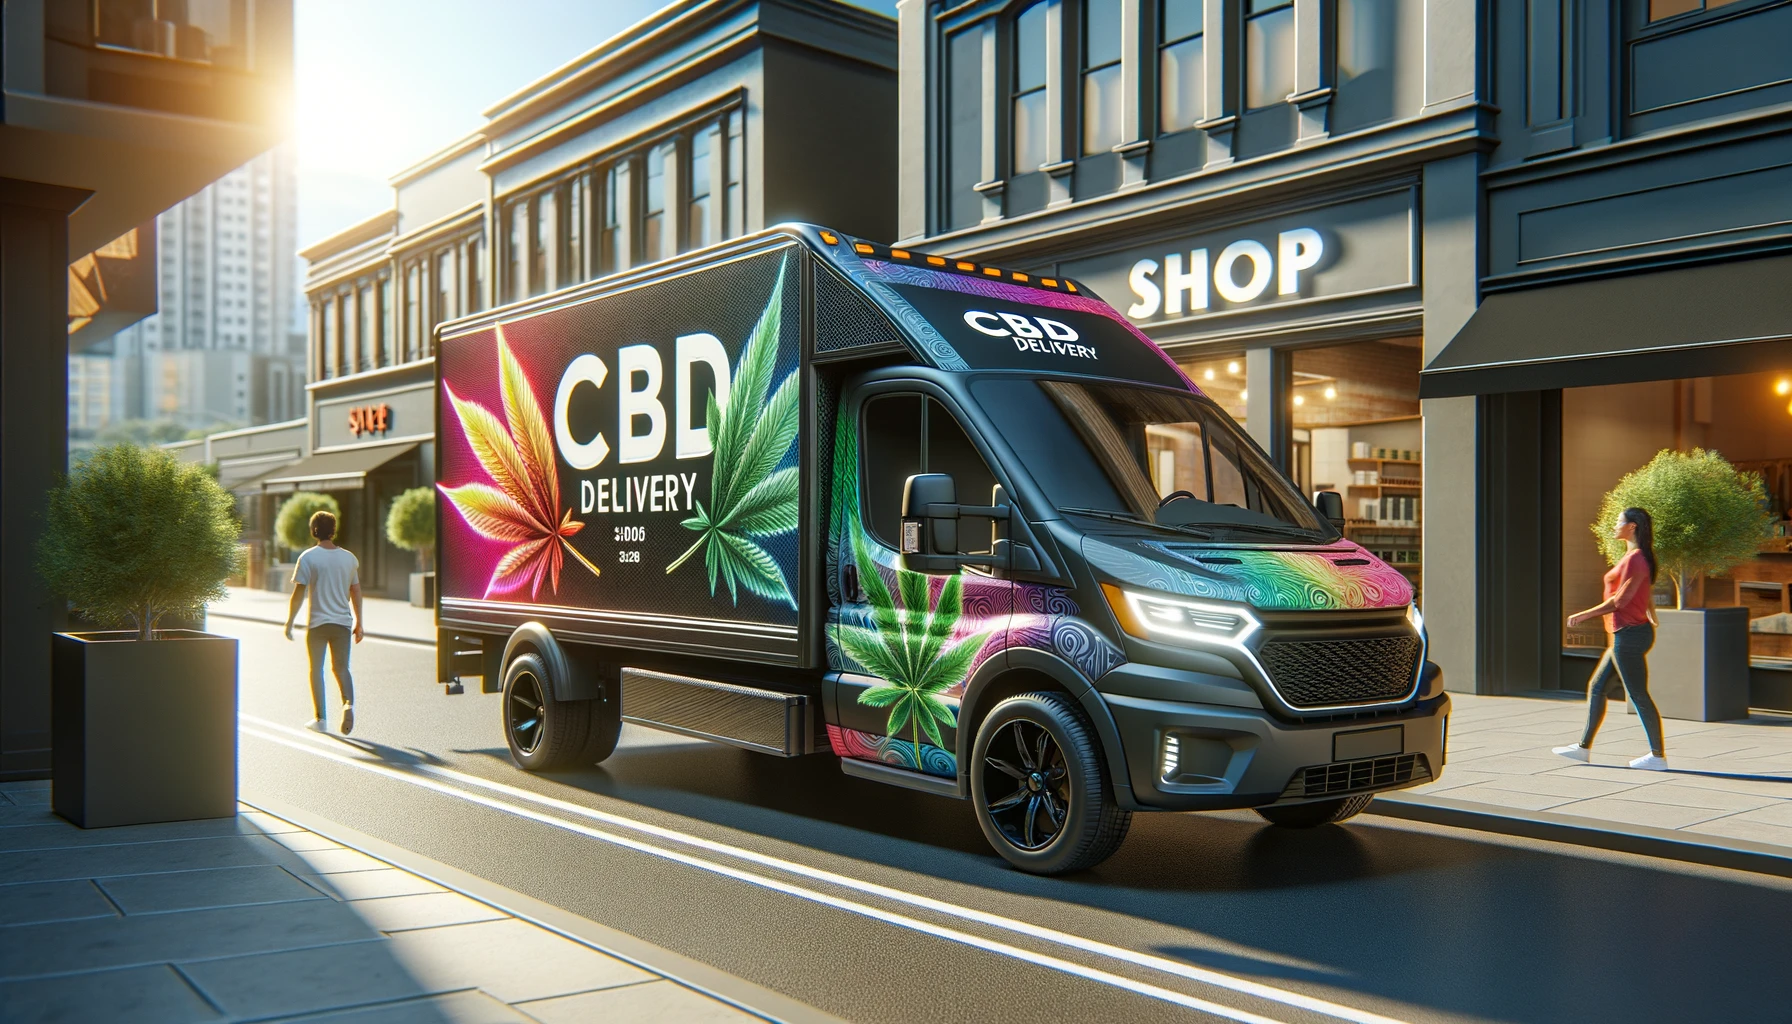 DALL·E 2024-02-21 10.44.56 - A sleek, modern delivery truck parked on an urban street in front of a shop. The truck is adorned with vibrant, eye-catching graphics promoting CBD pr